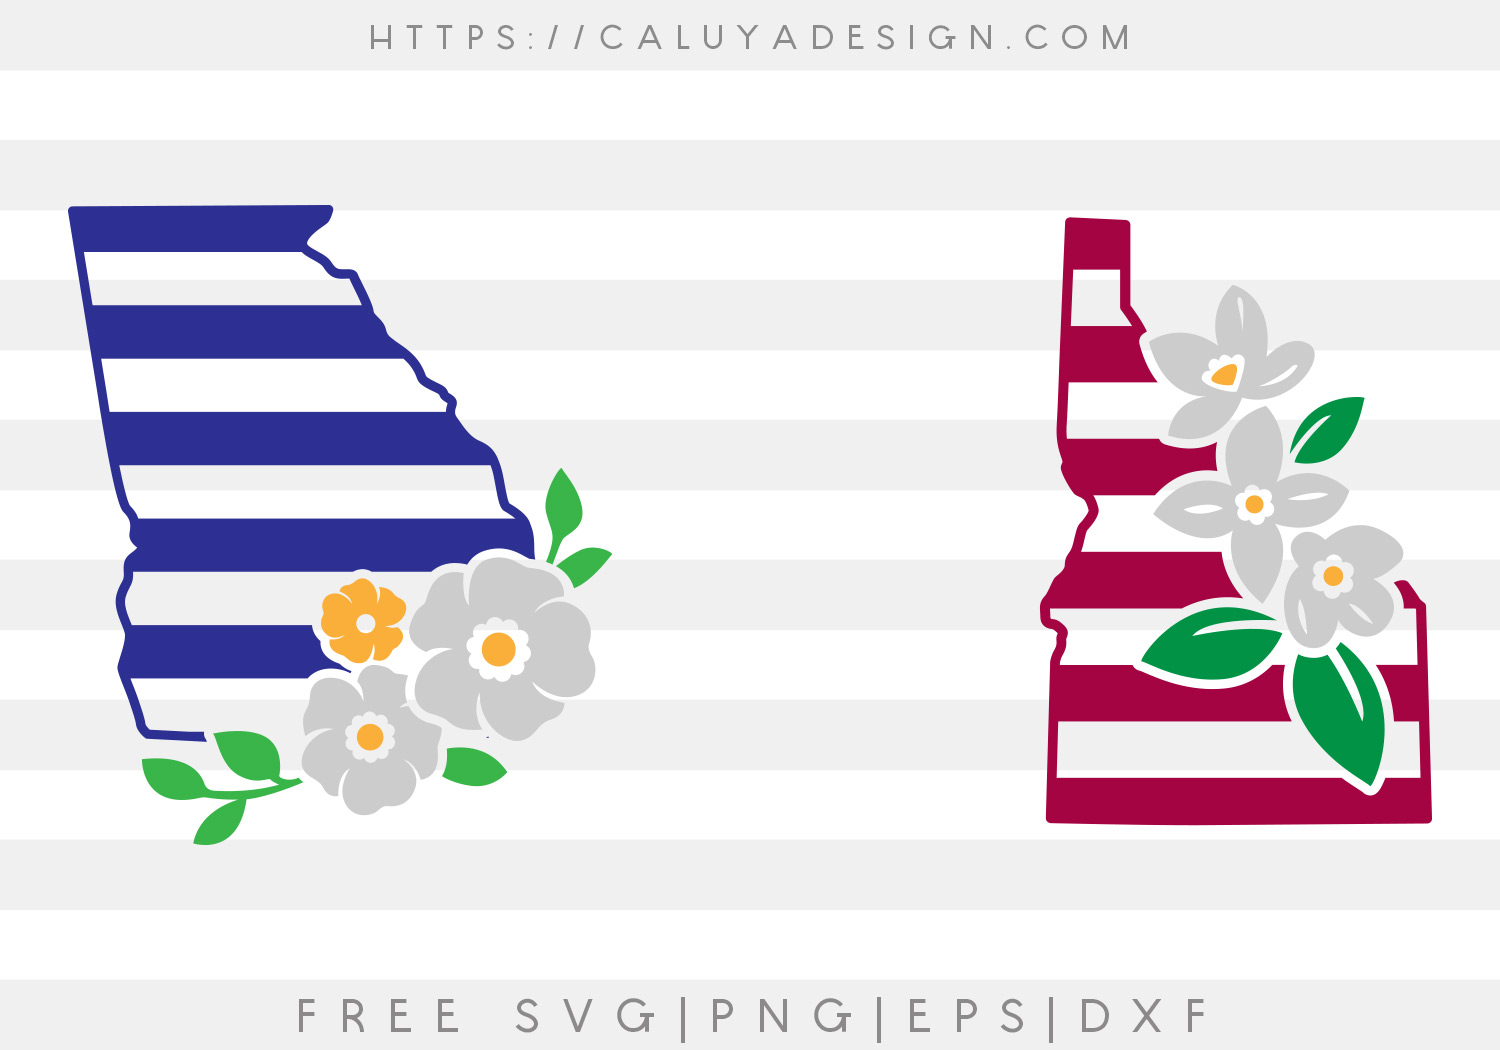 Free Georgia and Idaho State SVG, PNG, EPS & DXF